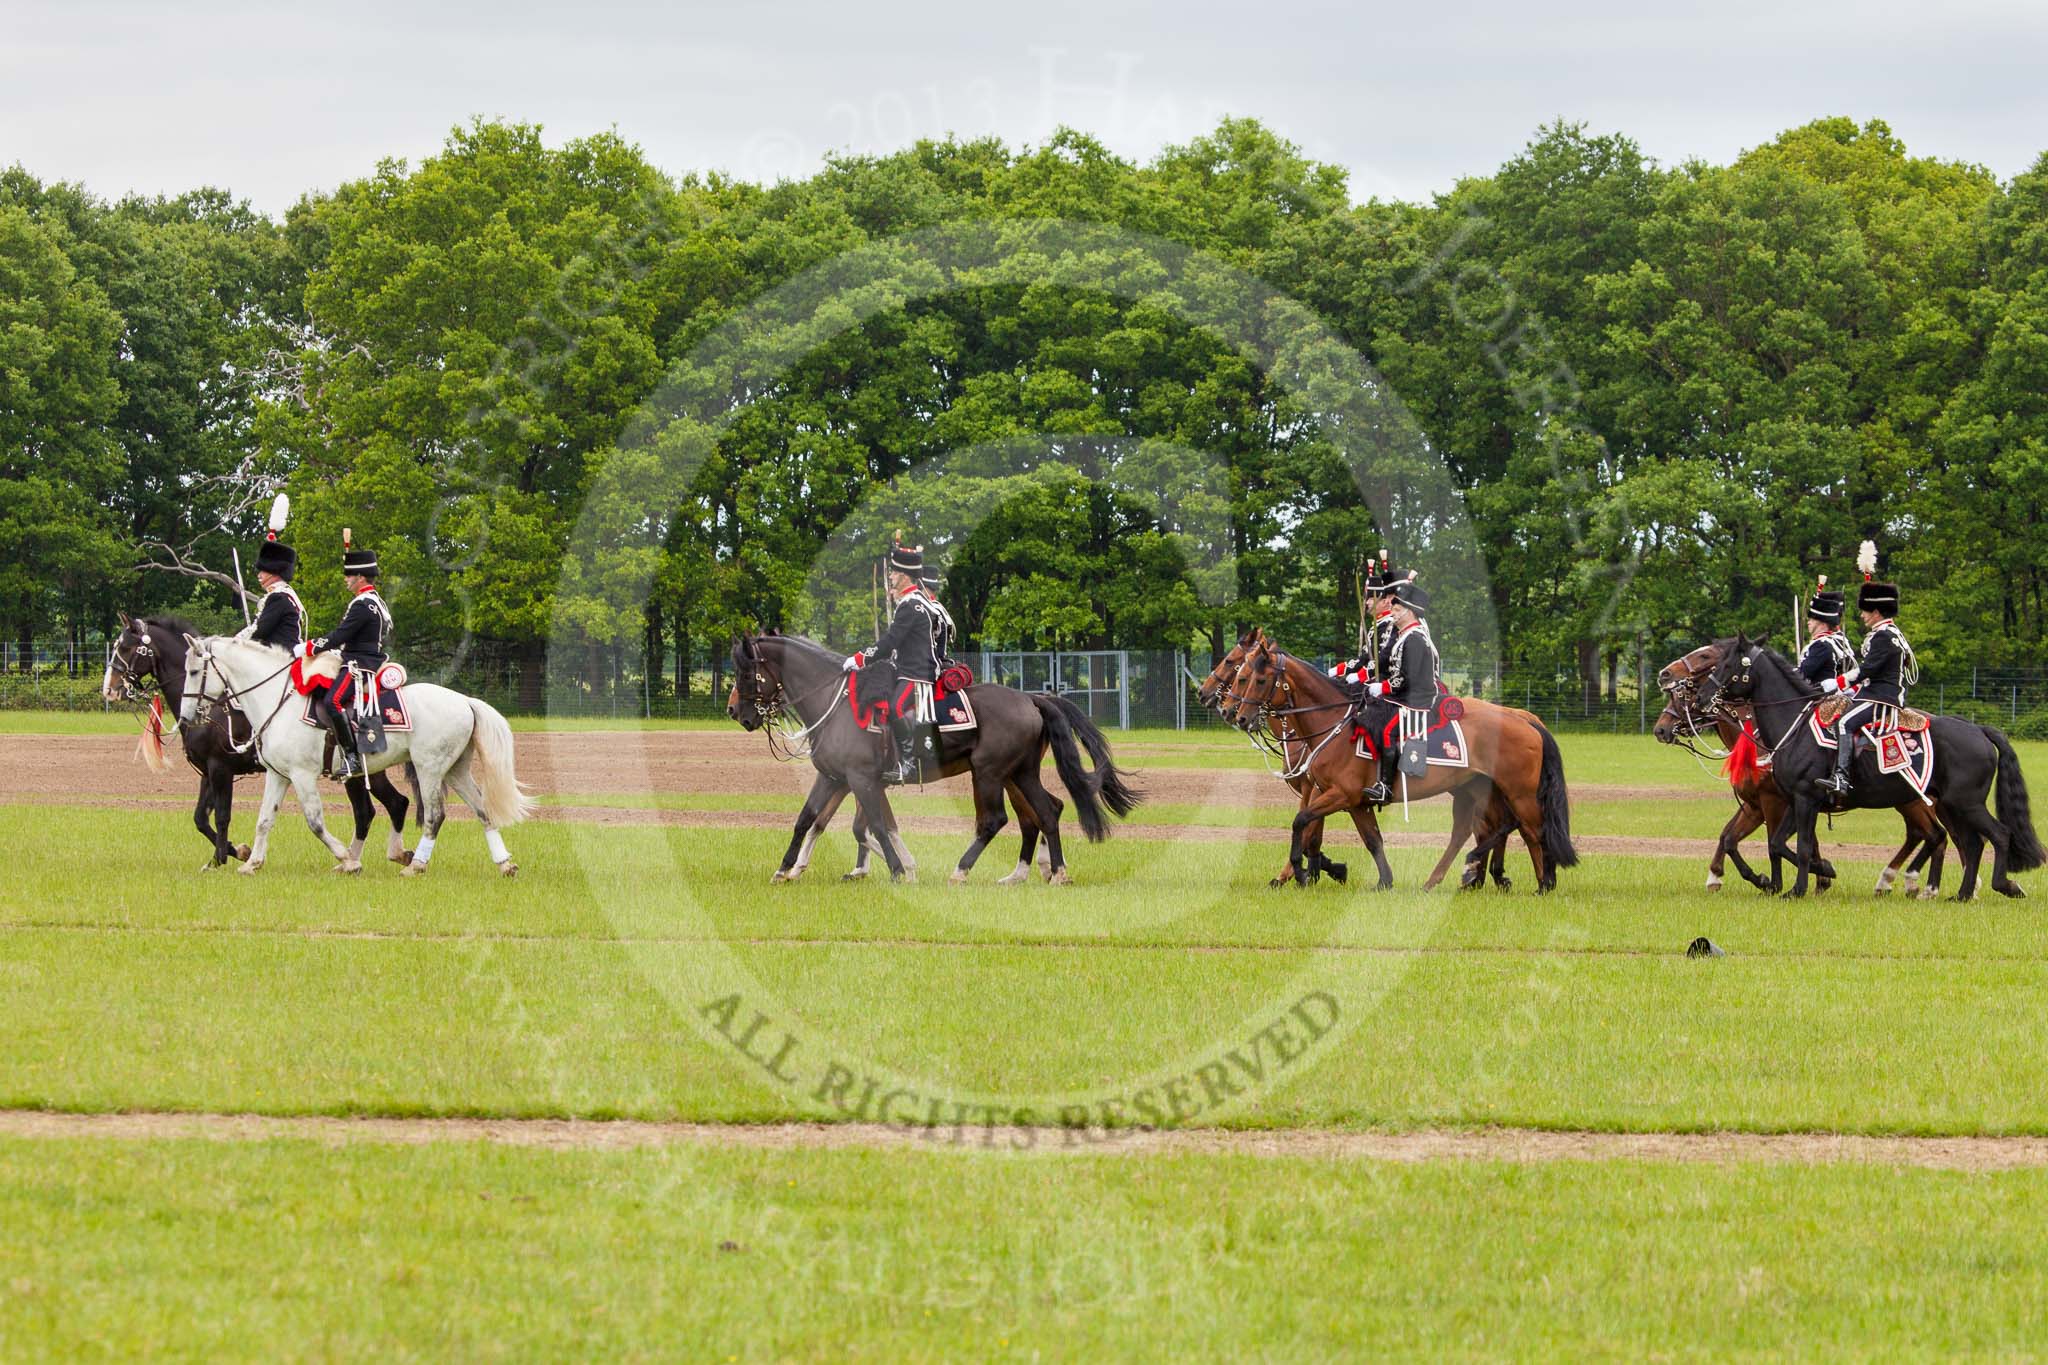 The Light Cavalry HAC Annual Review and Inspection 2013.
Windsor Great Park Review Ground,
Windsor,
Berkshire,
United Kingdom,
on 09 June 2013 at 13:34, image #428